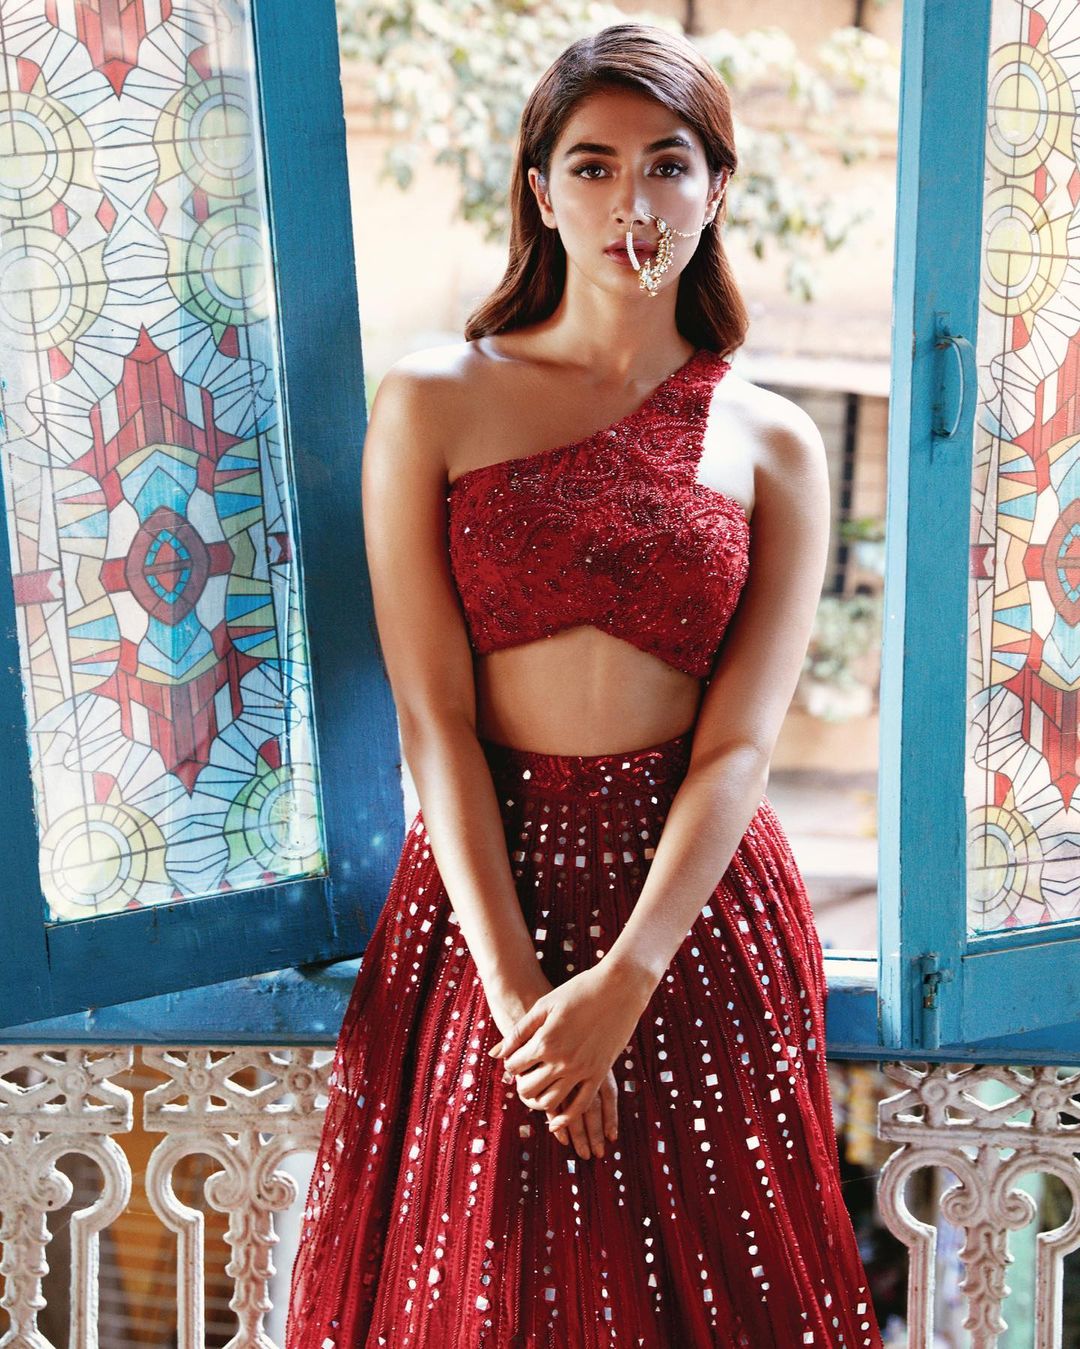 Pooja Hegde looks super sultry in the deep red lehenga with mirrorwork.